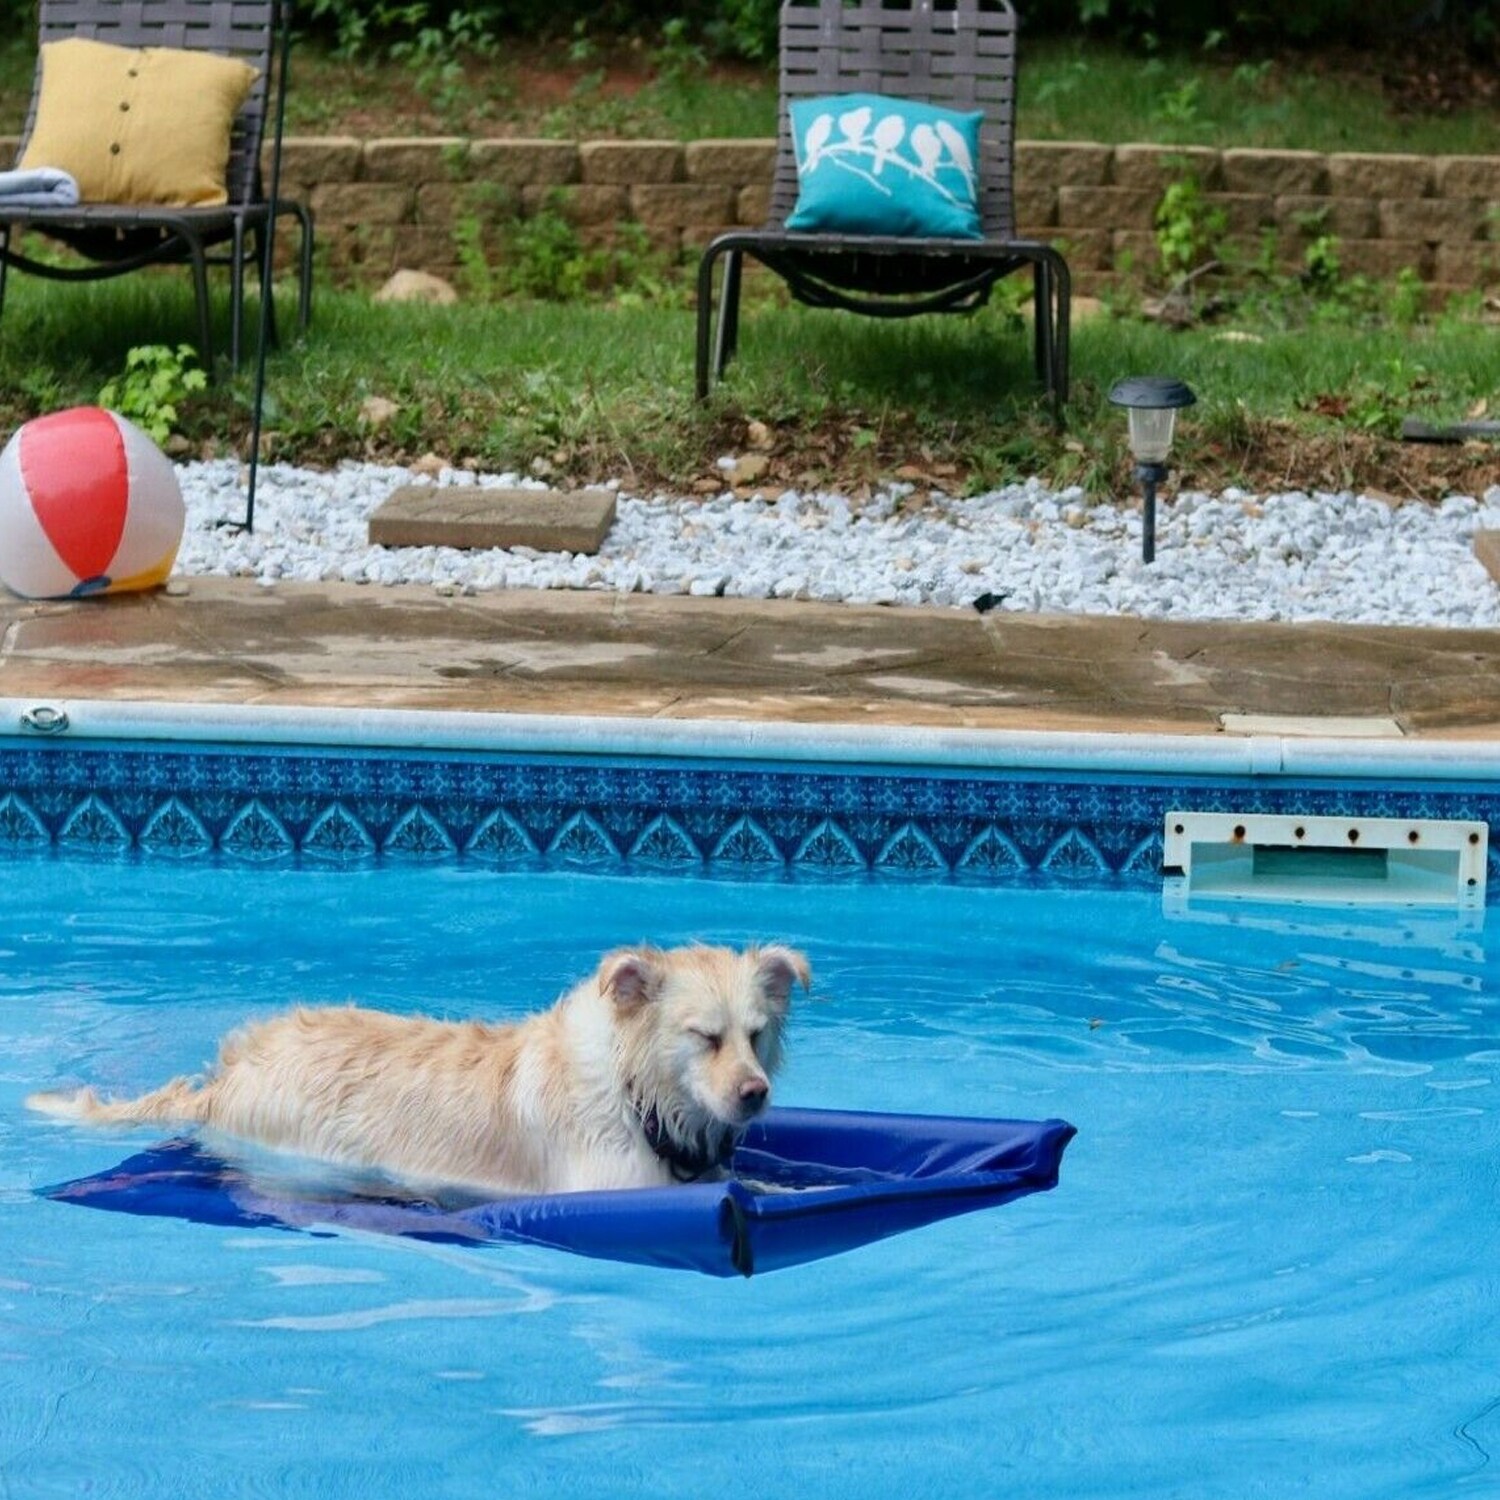 Large Details about   The Better Options Company Blue Lazy Dog Pool Lounger and Lake Raft Float 